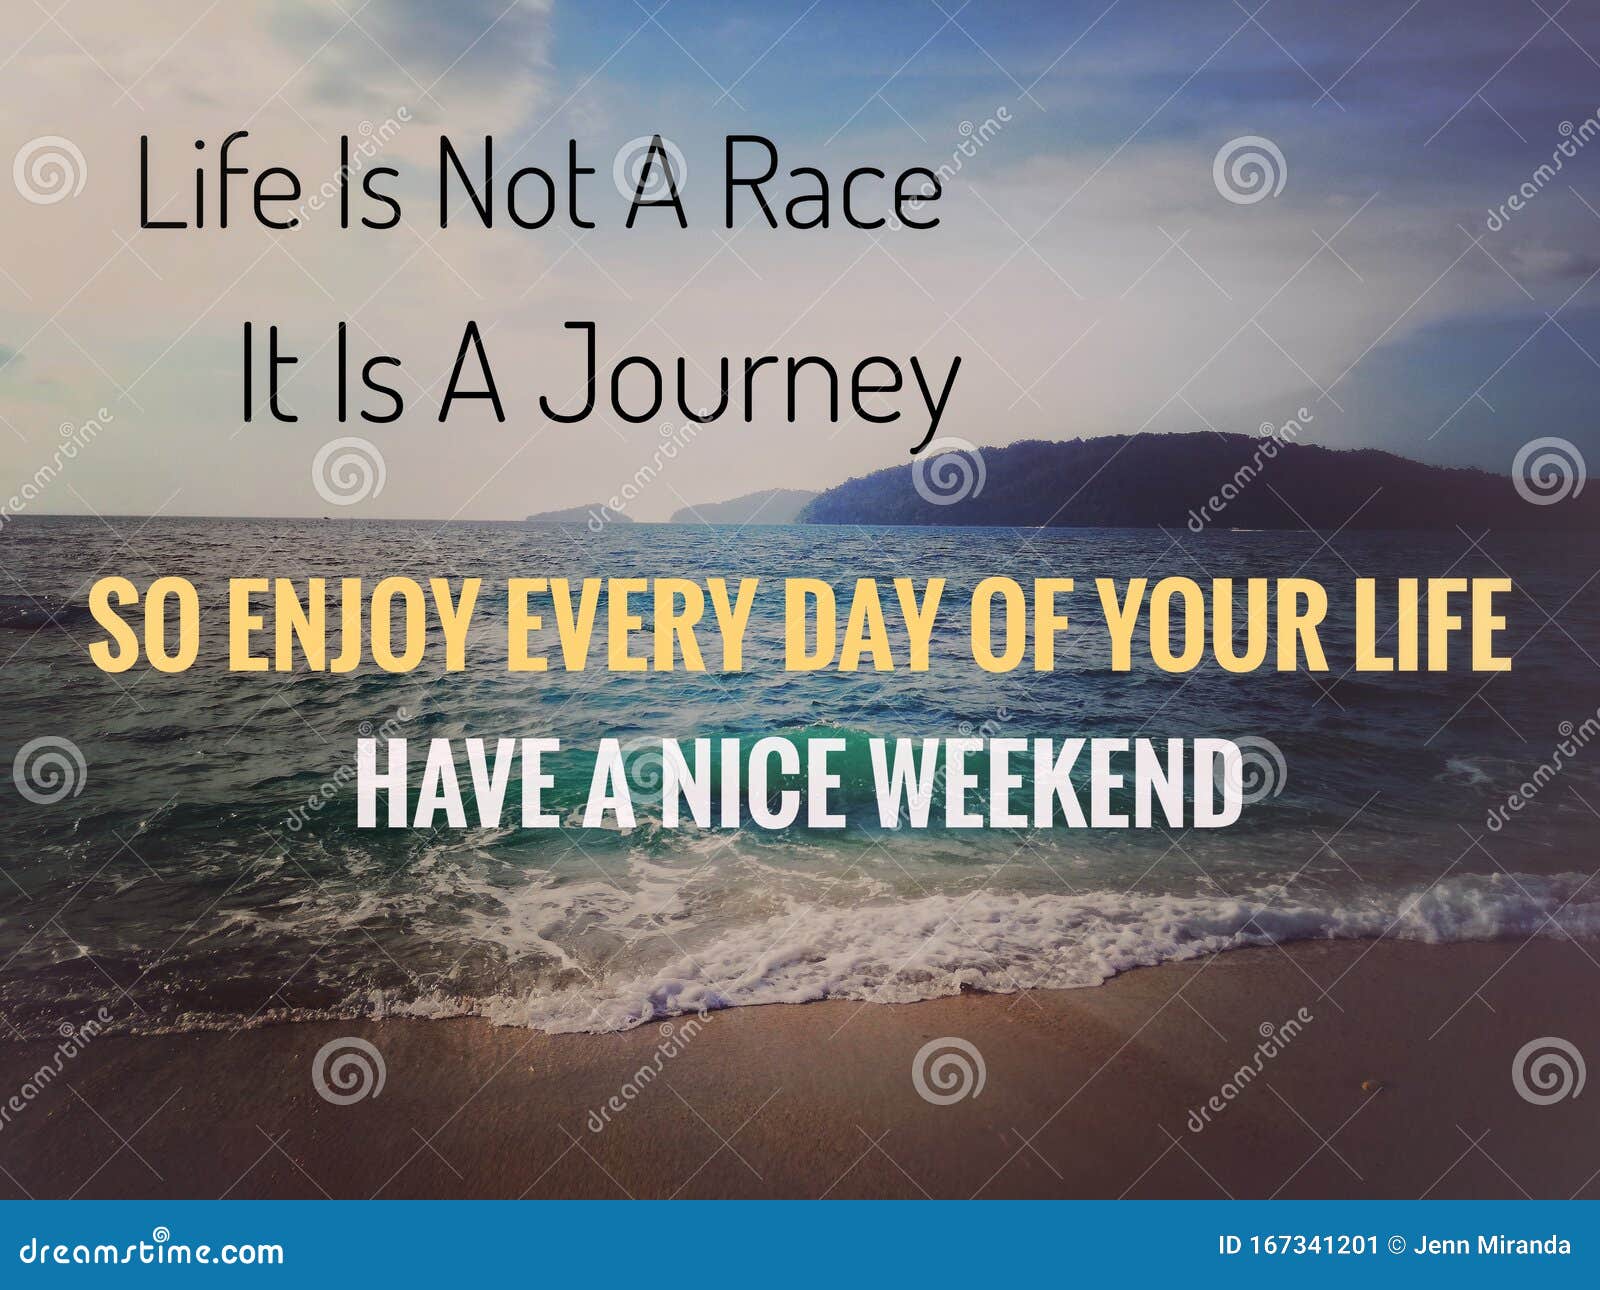 Happy Weekend Quotes Photos - Free & Royalty-Free Stock Photos from  Dreamstime